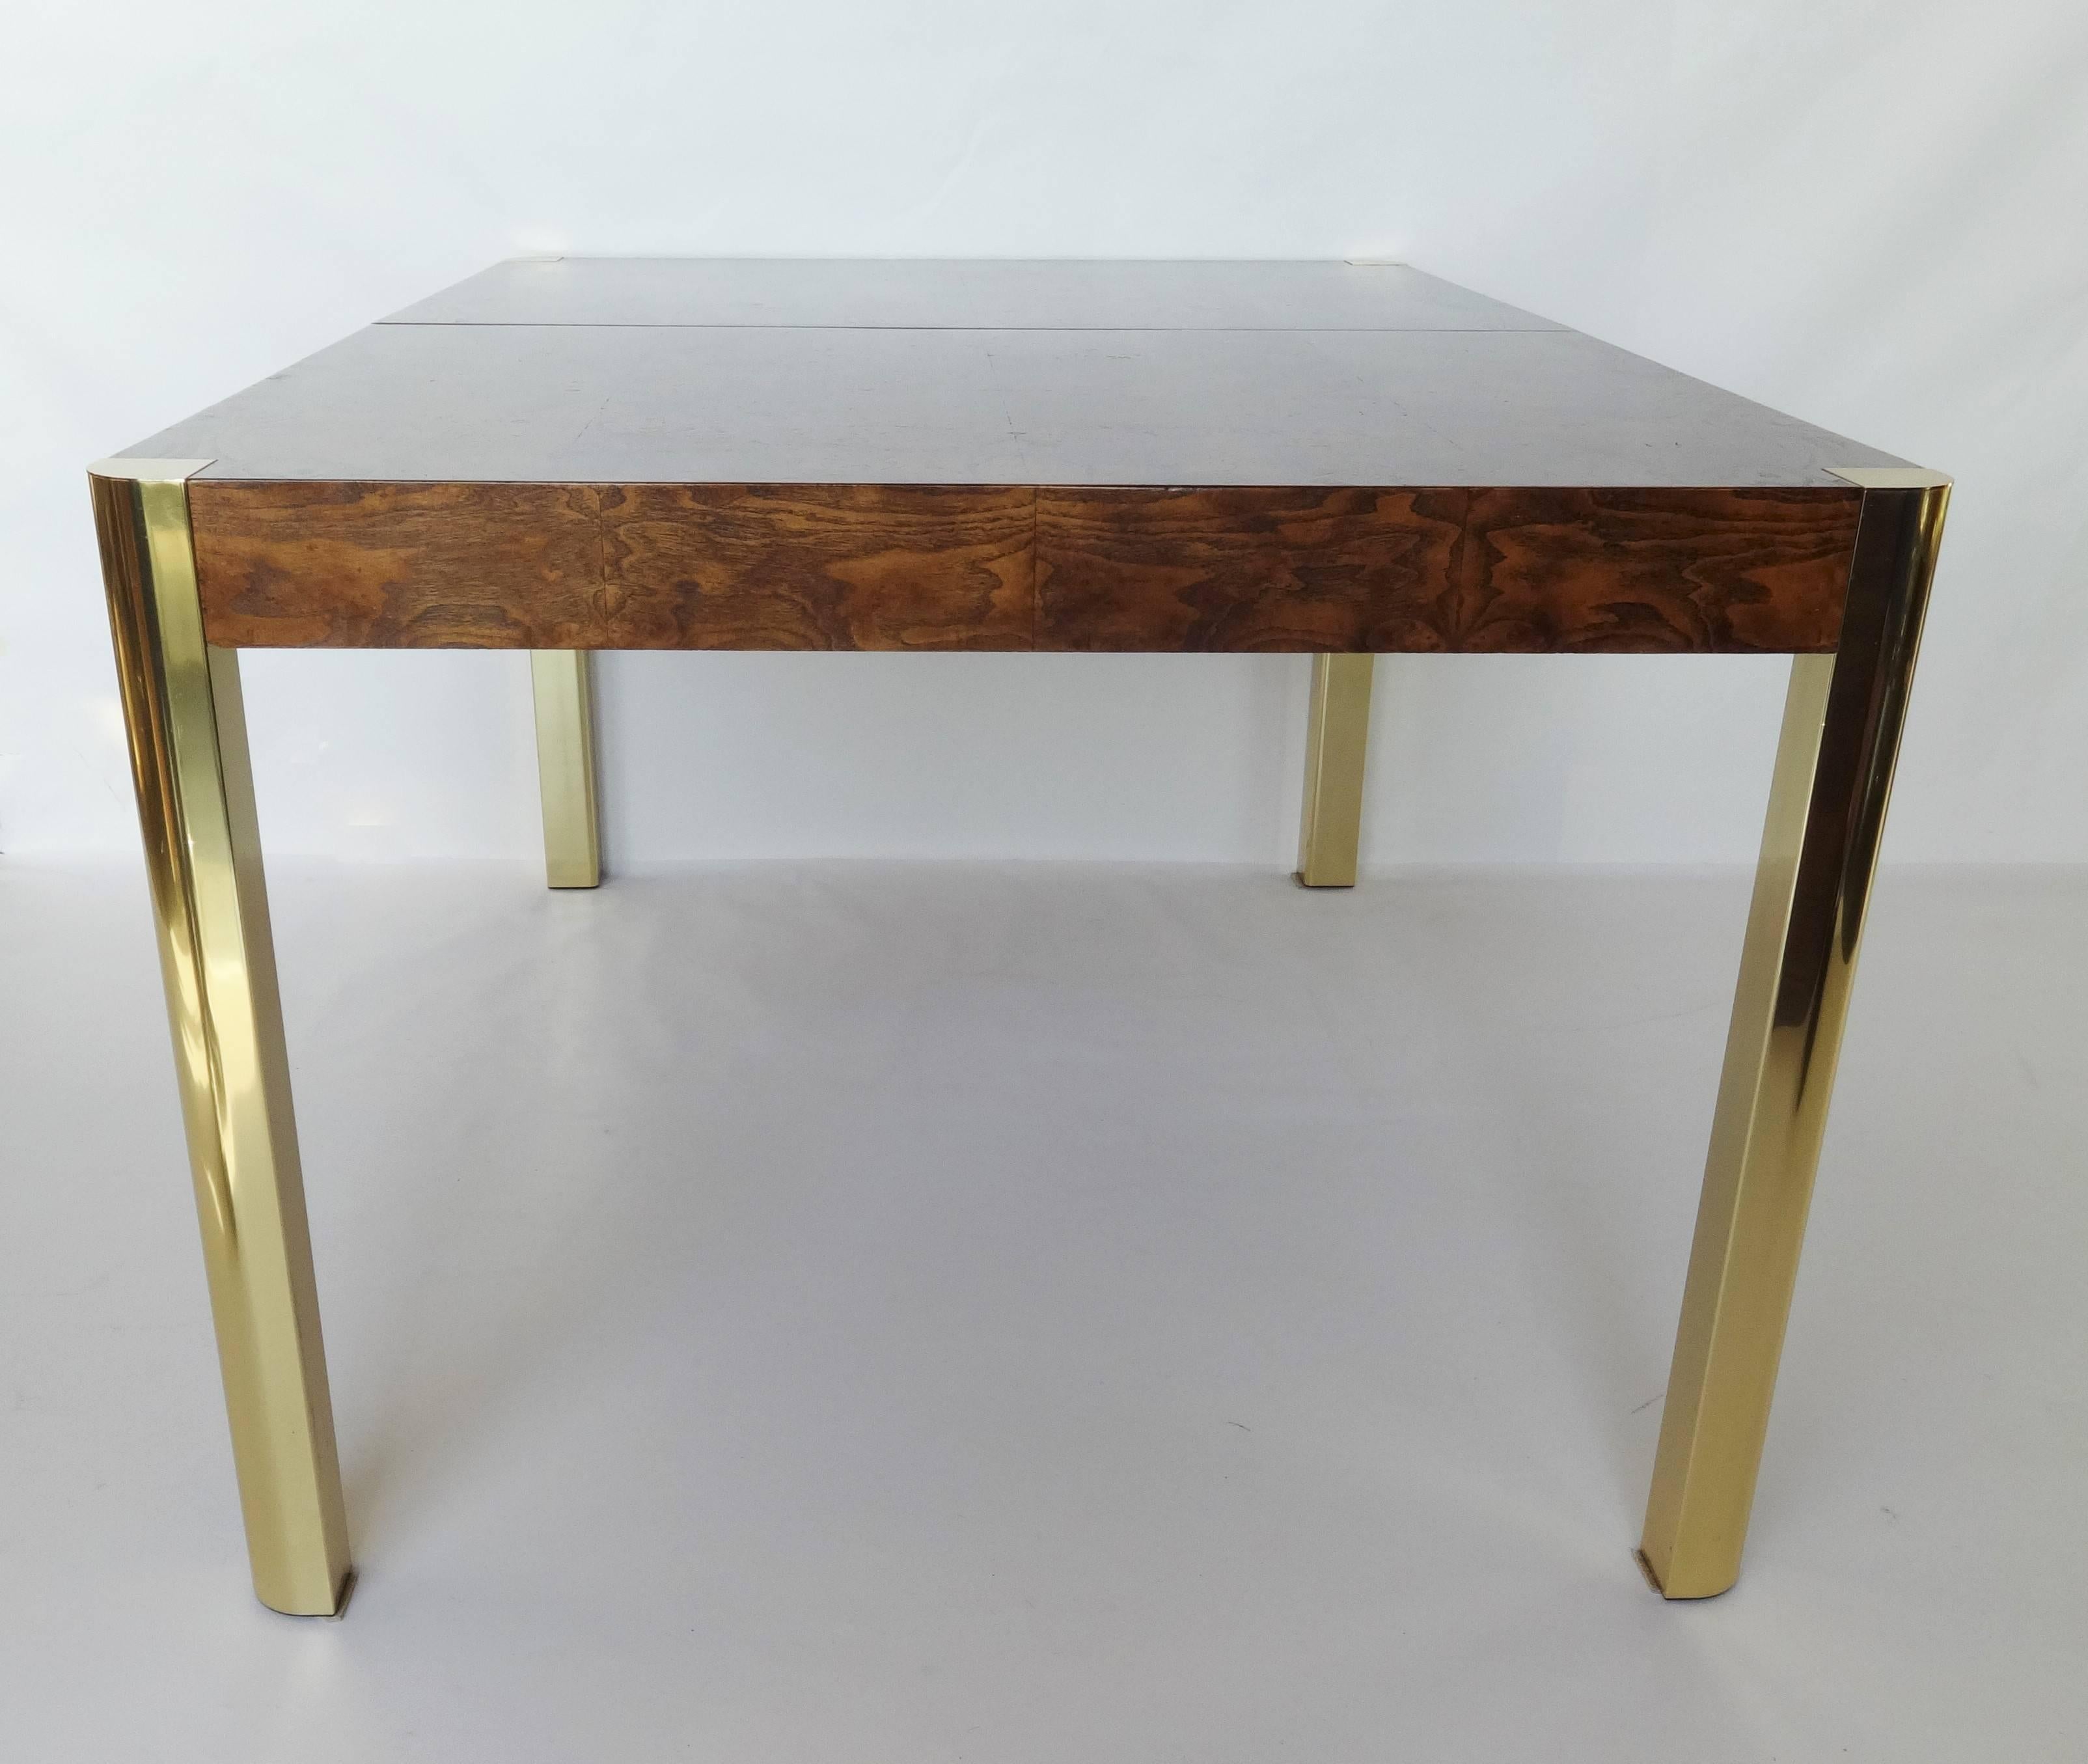 Late 20th Century Burl Wood and Brass Dining Table by Century Furniture Company